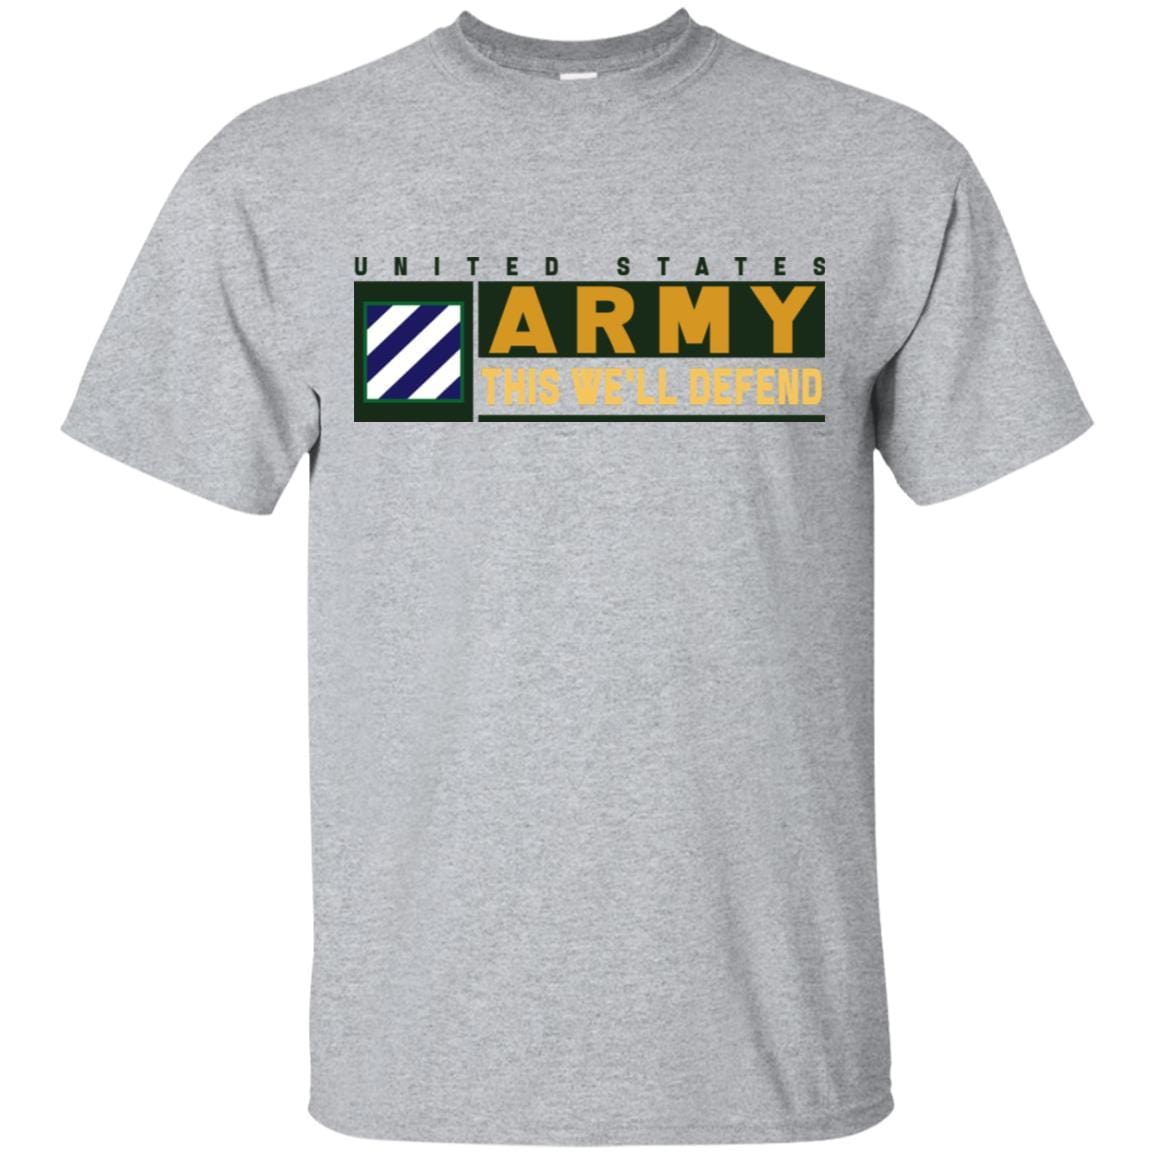 US Army 3rd Infantry Division,- This We'll Defend T-Shirt On Front For Men-TShirt-Army-Veterans Nation